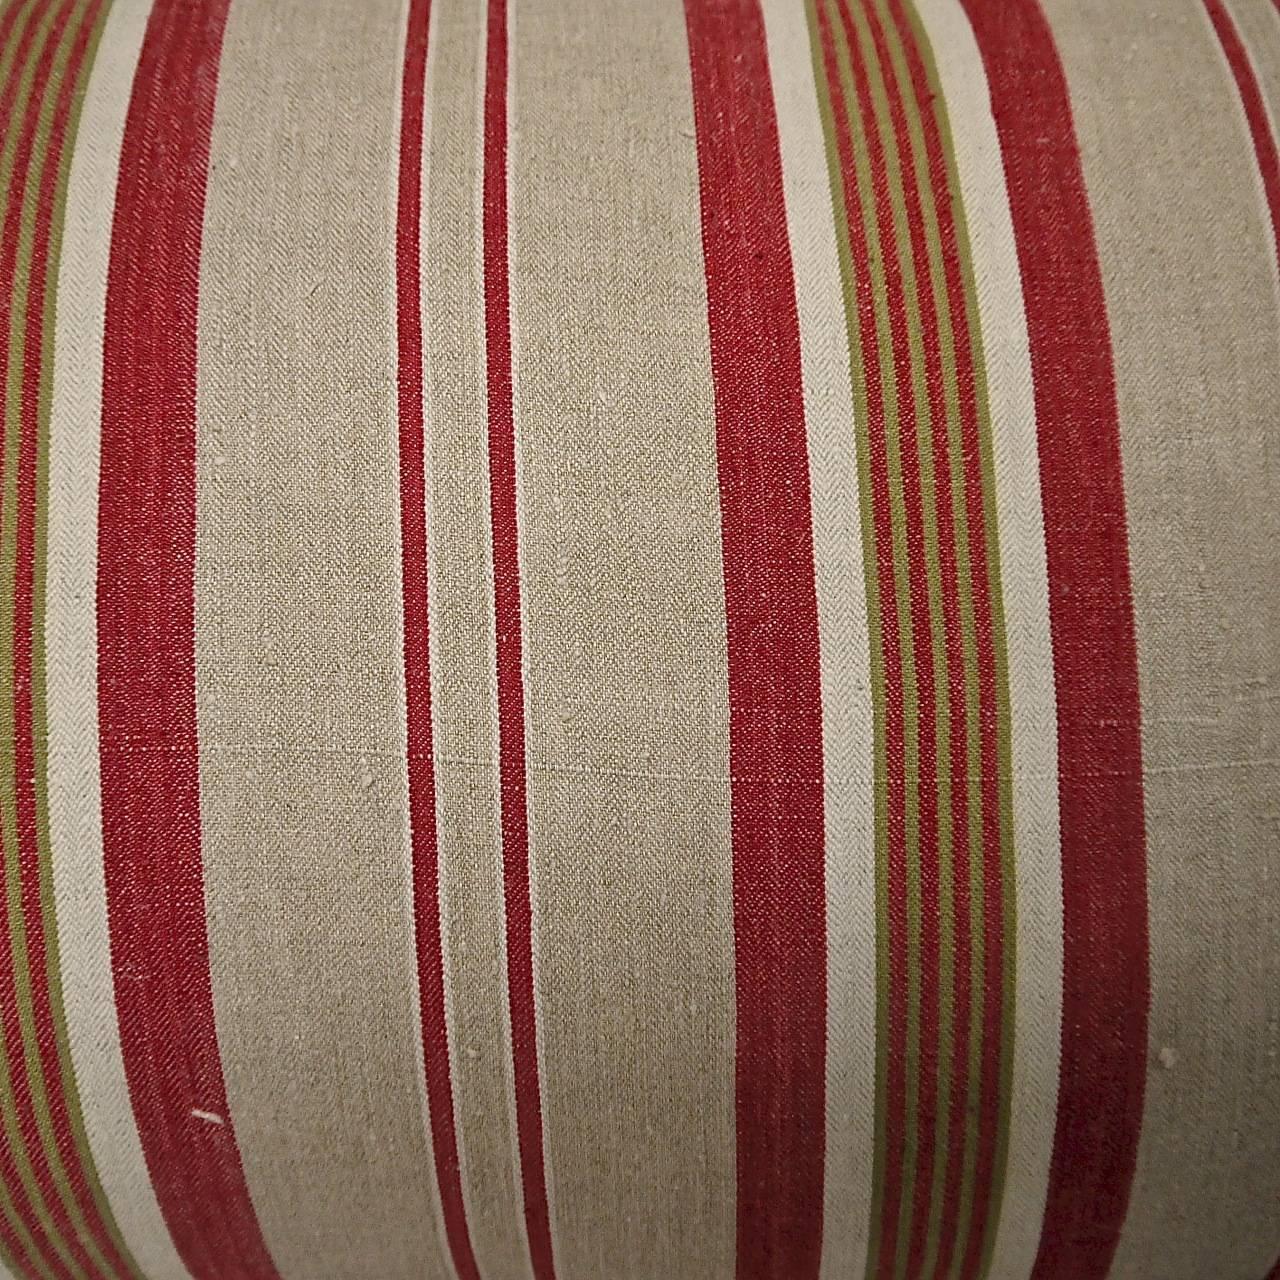 Woven Antique French Red Beige Green Striped Linen Ticking Pillow with Tassels